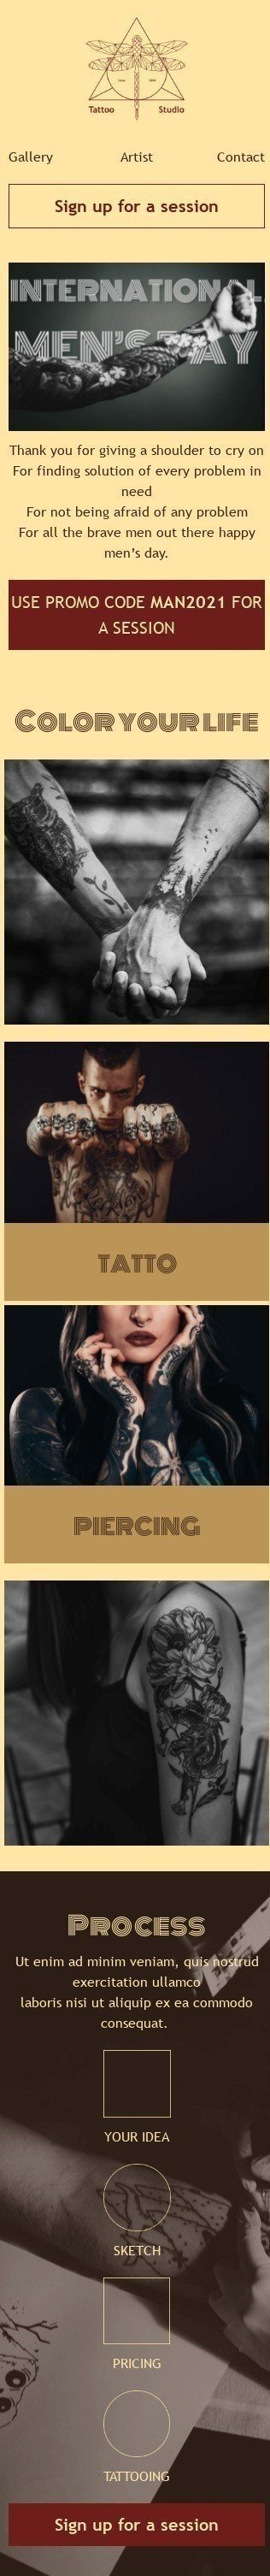 International Men's Day Email Template «Tattoo Studio» for Beauty & Personal Care industry mobile view